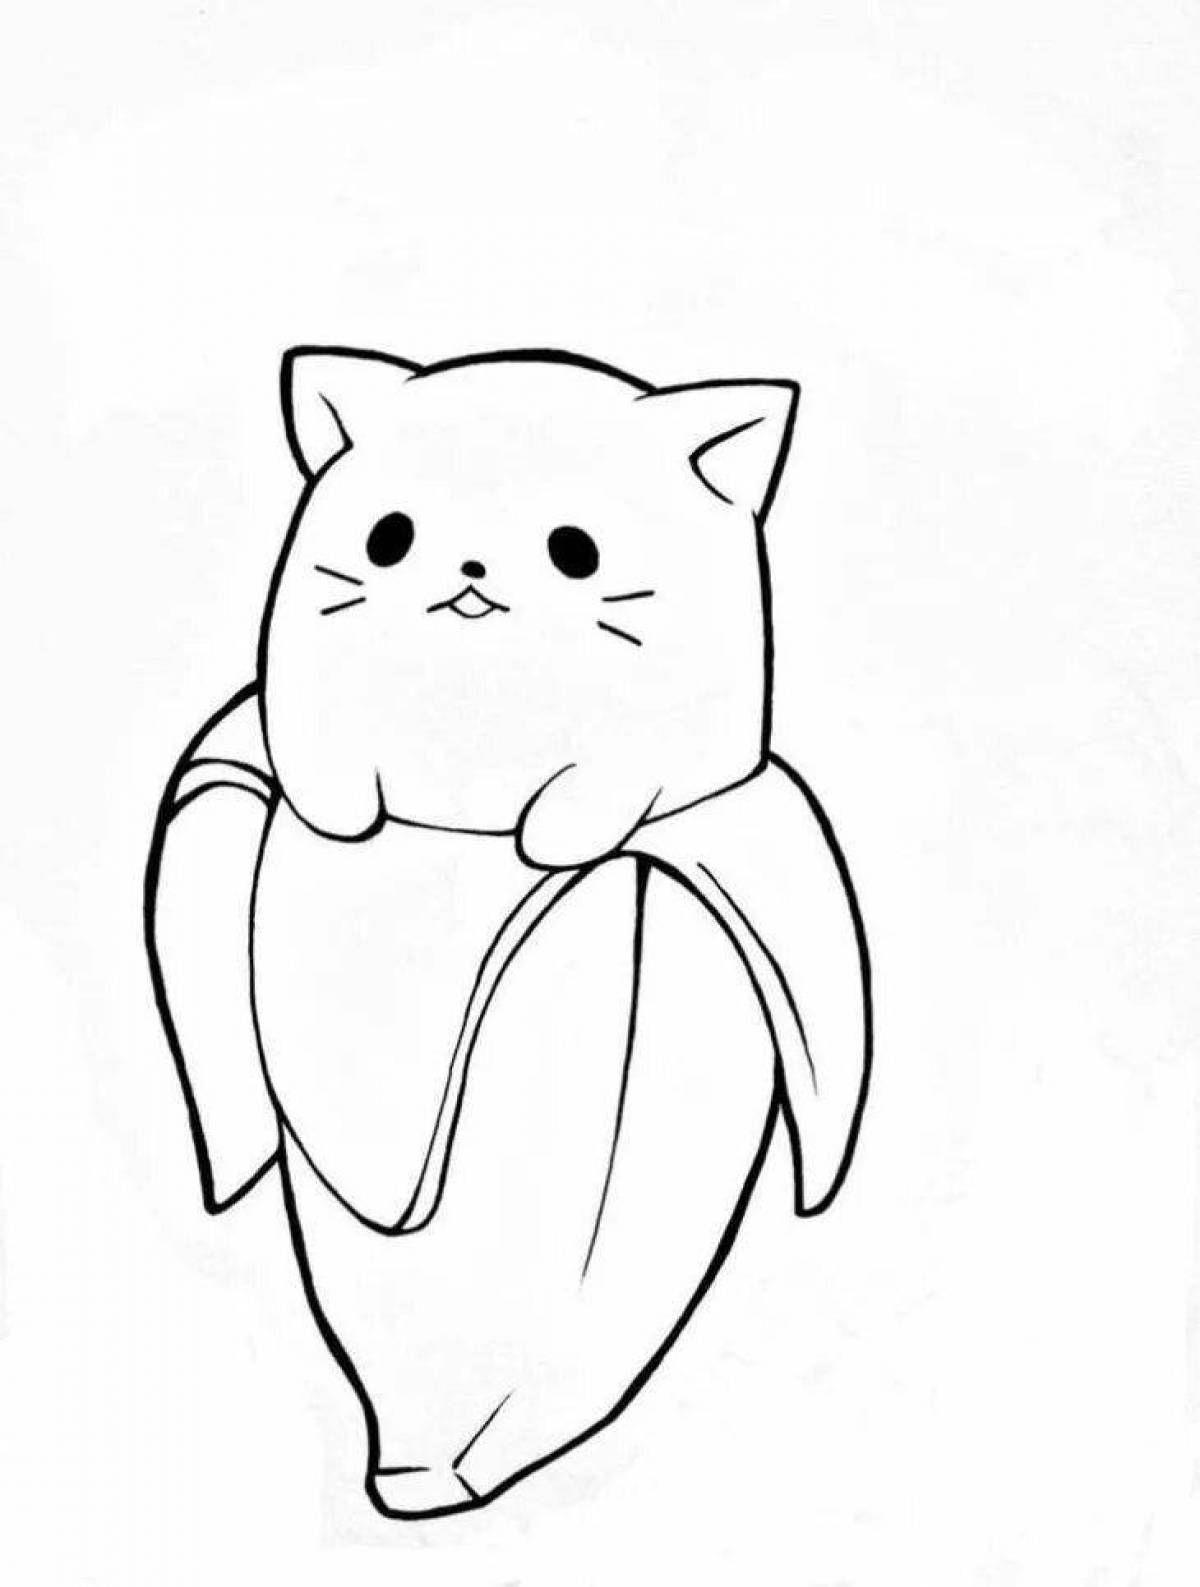 Colorful cute cat coloring page